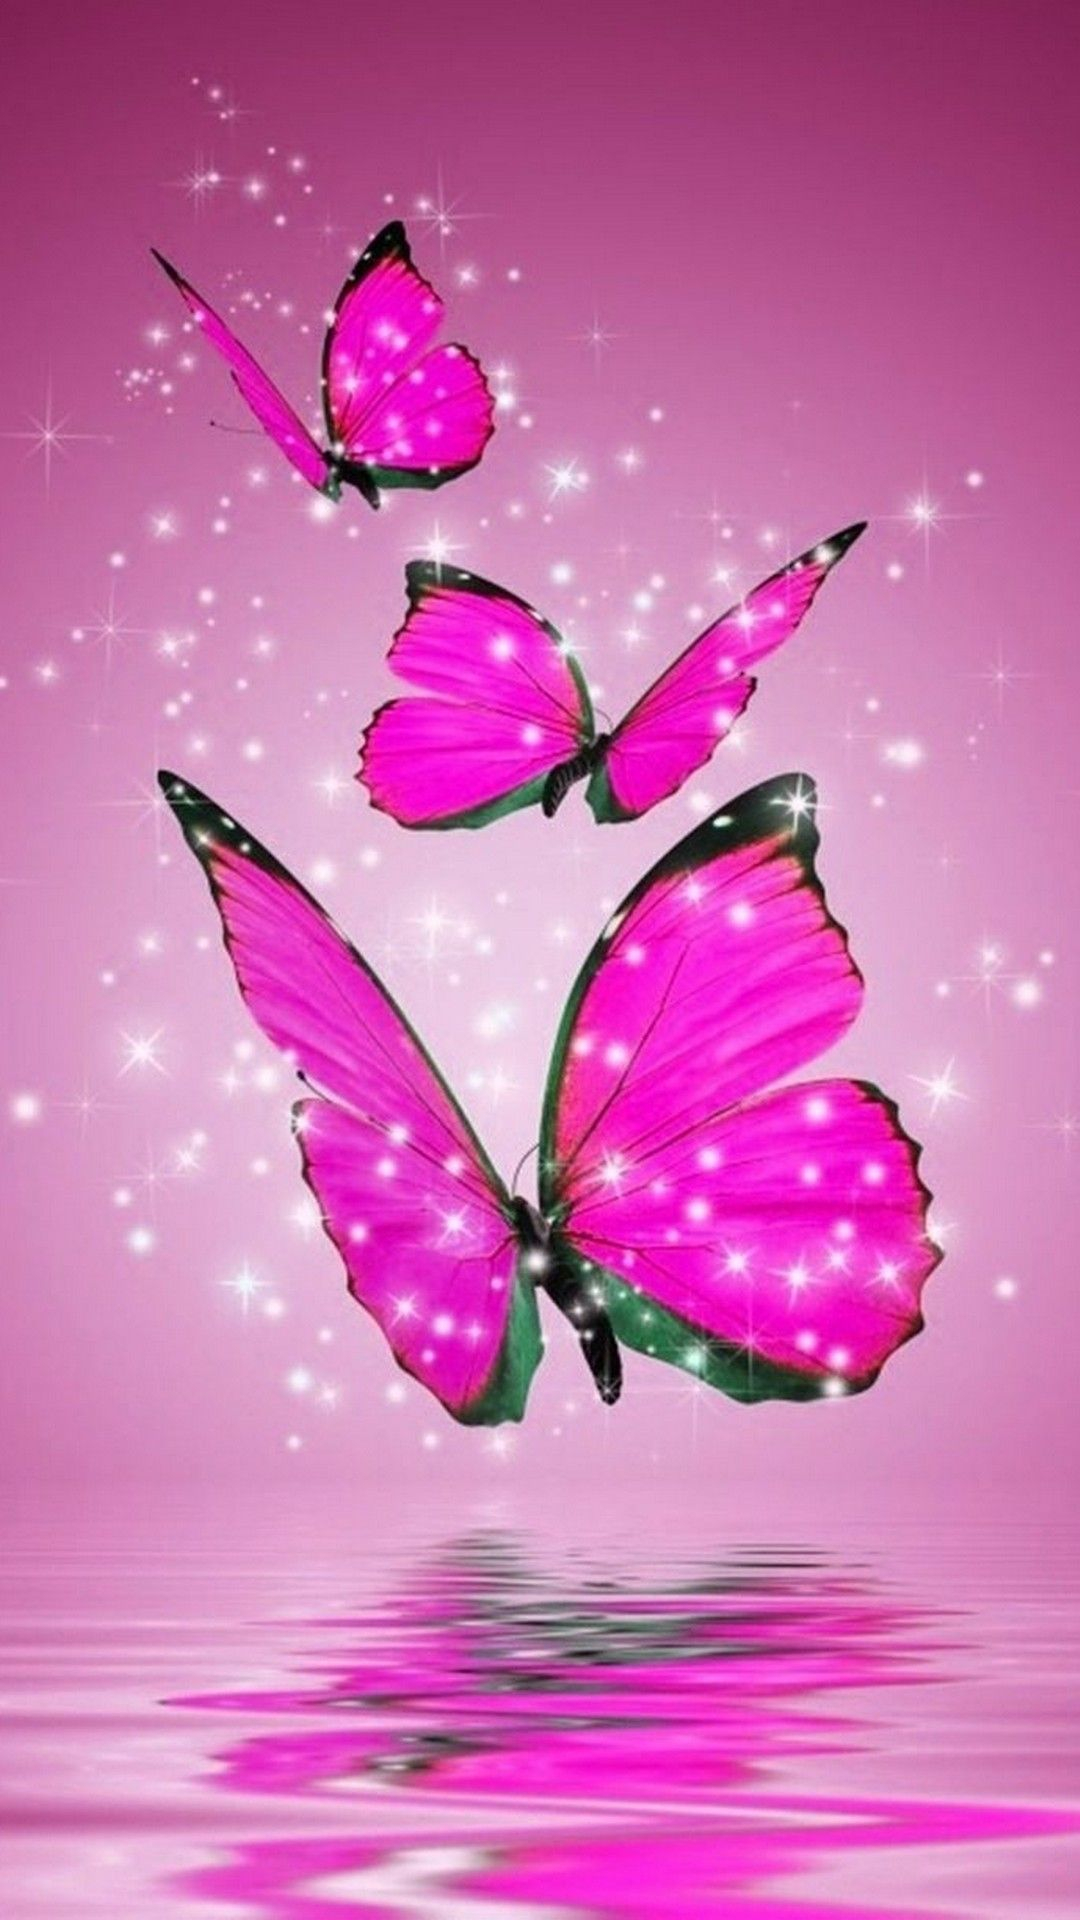 1080x1920 Midnight Purple Butterfly Wallpapers Top Free Midnight Purple Butterfly Backgrounds